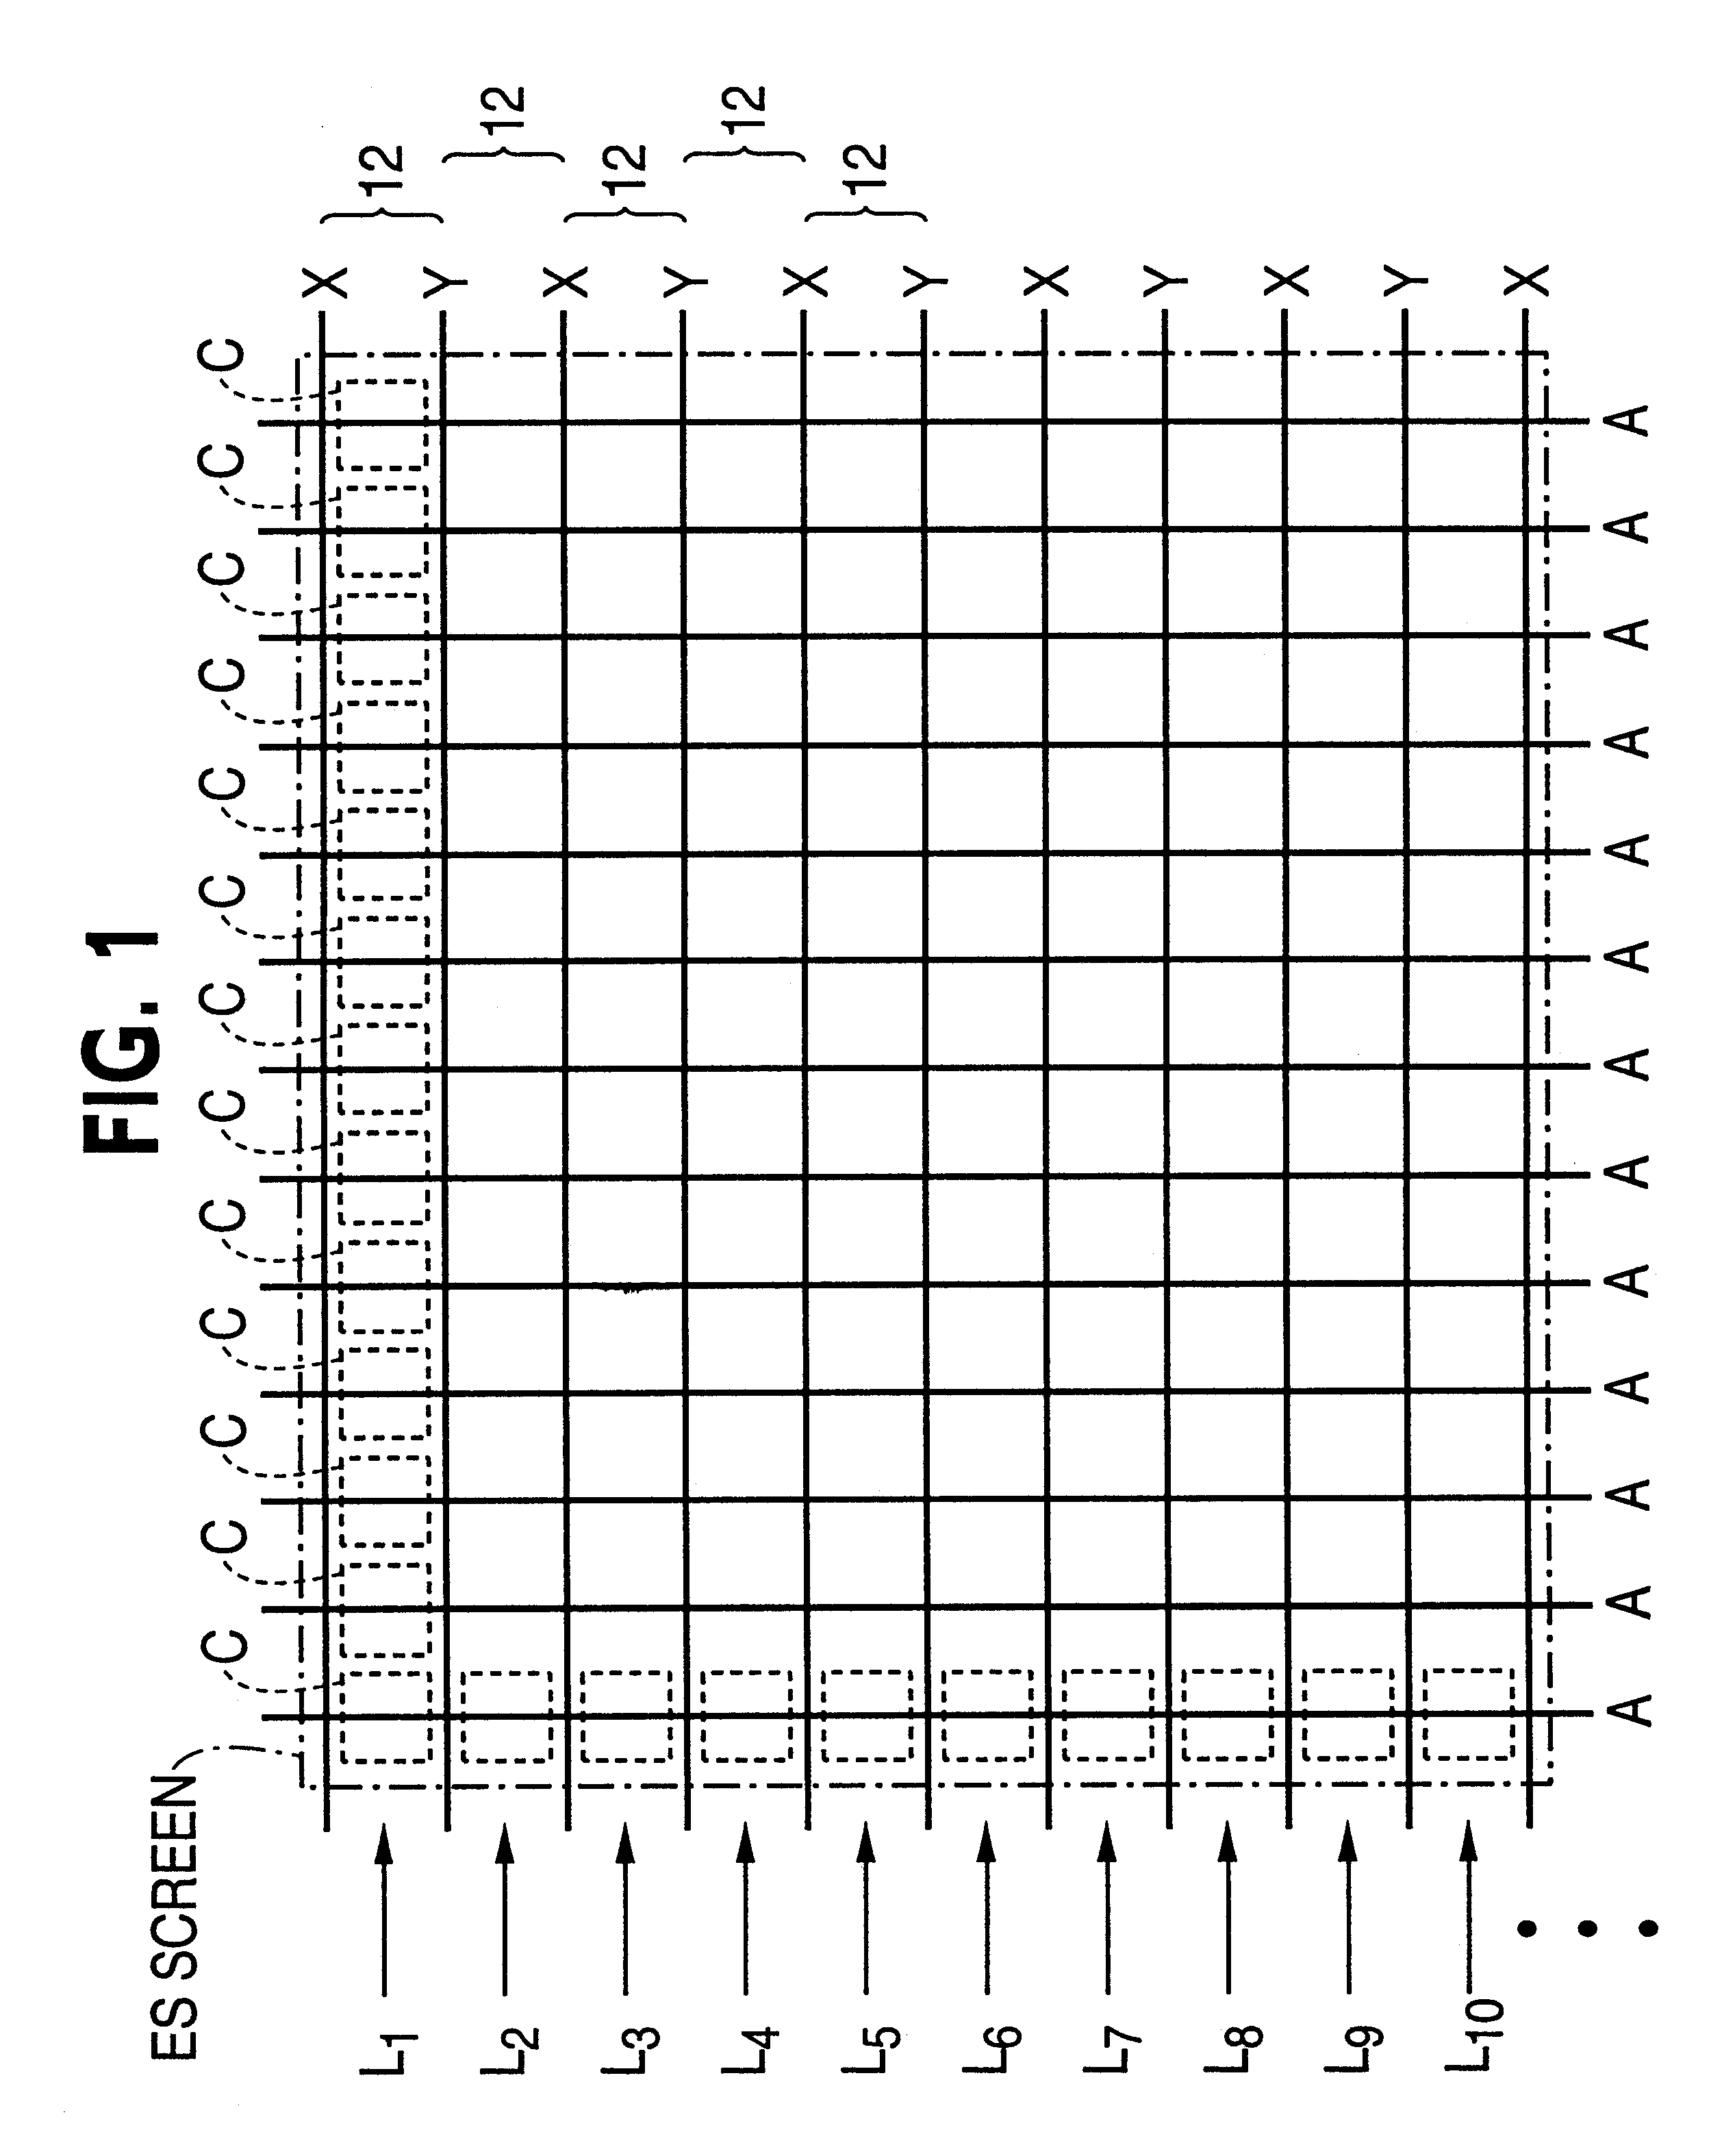 Plasma display panel with various electrode projection configurations